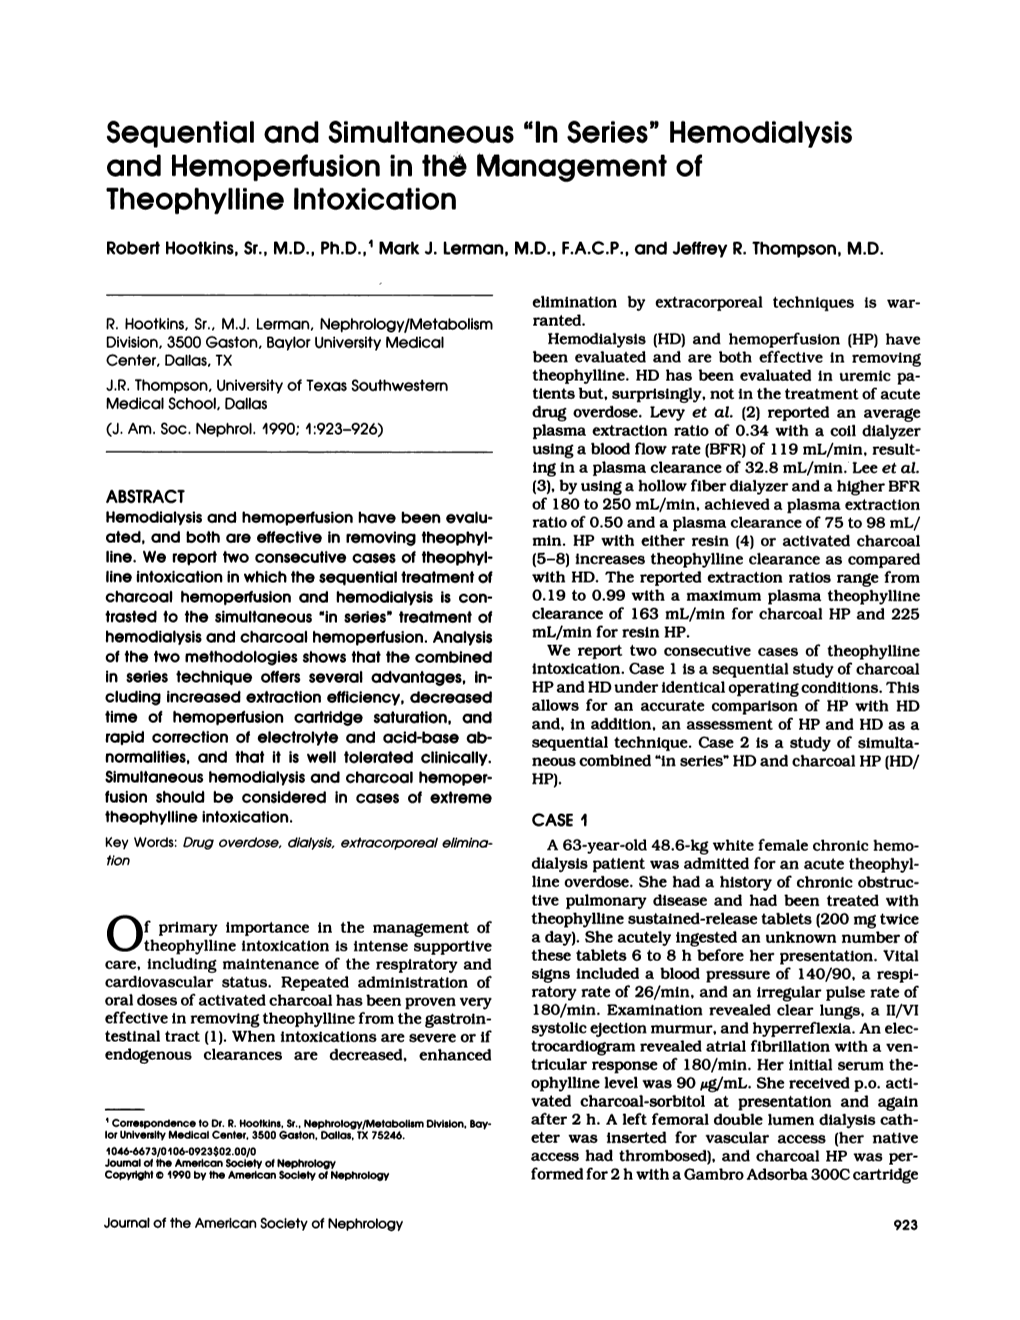 Hemodialysis and Hemoperfusion in the Management of Theophylline Intoxication